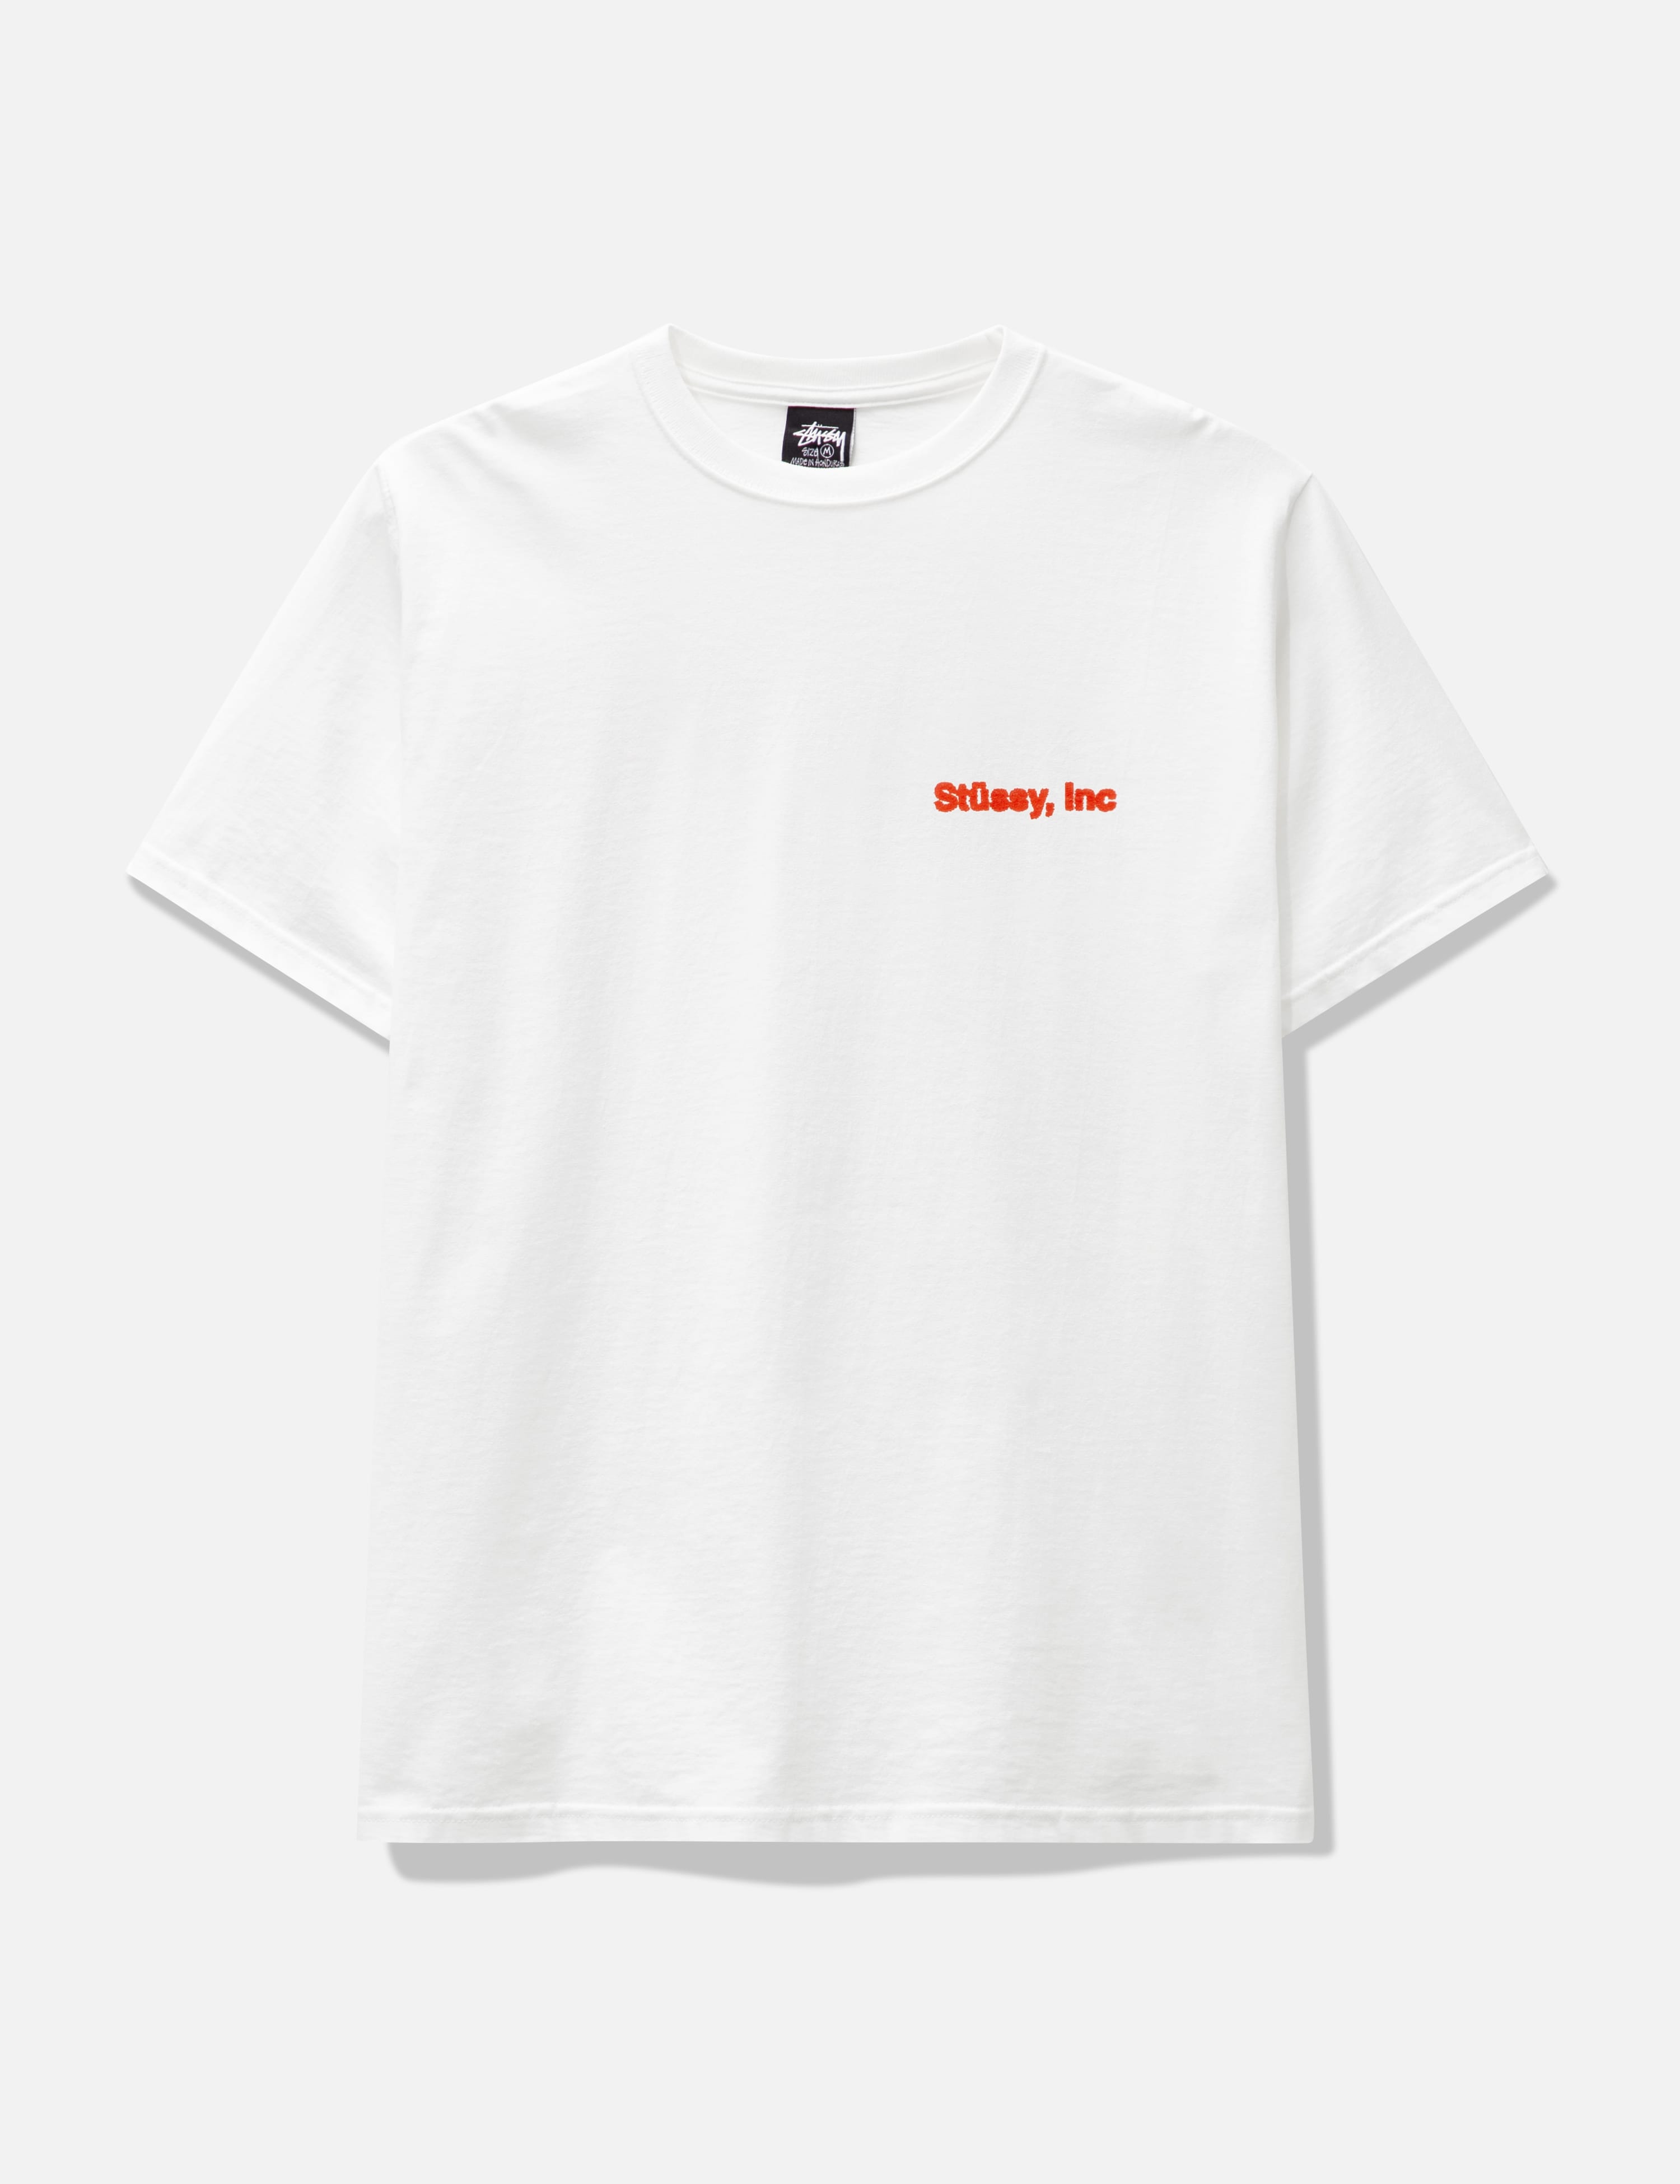 Stüssy - Wiki T-shirt | HBX - Globally Curated Fashion and